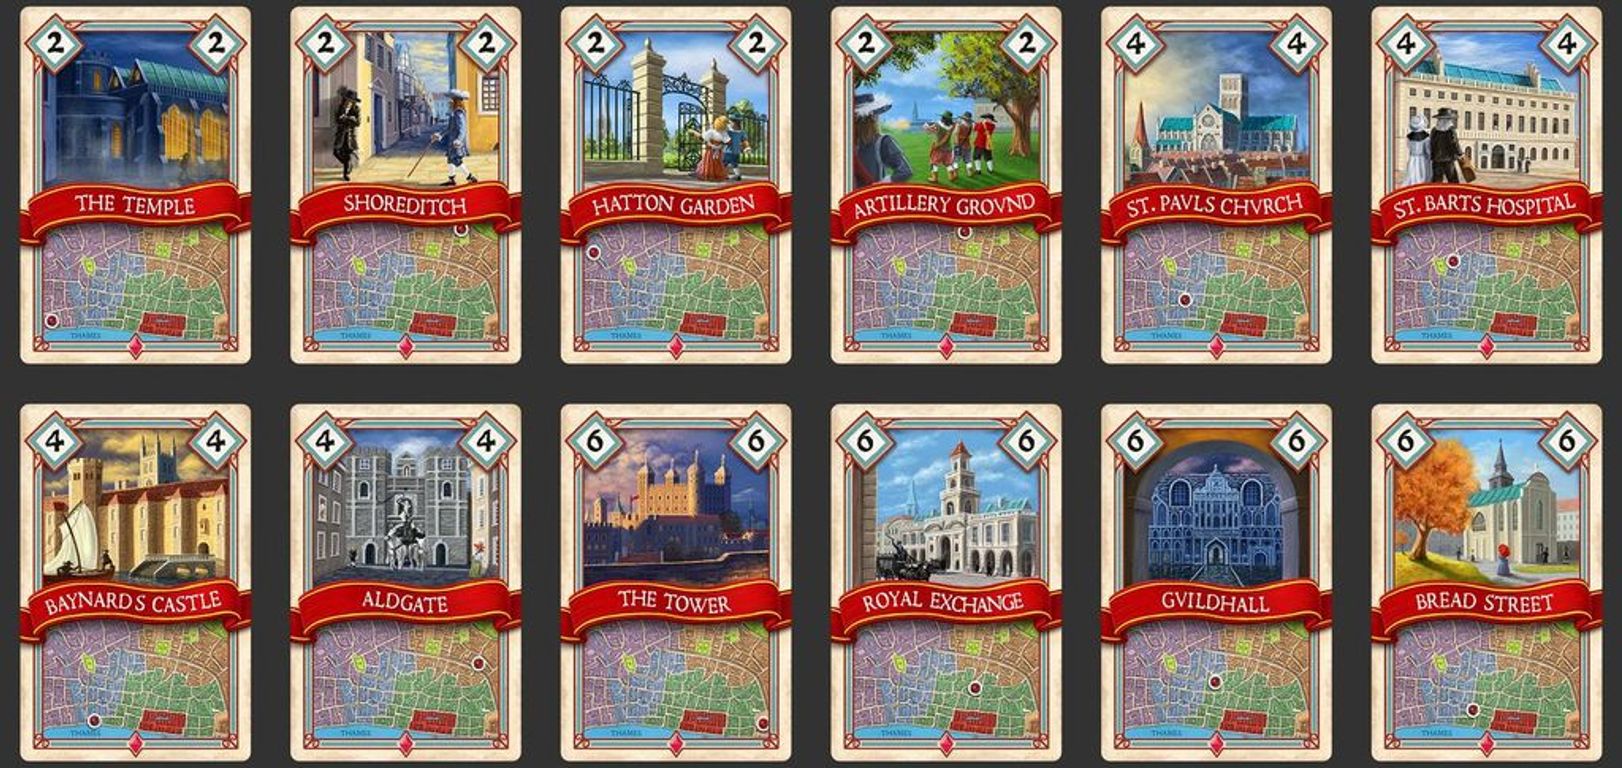 The Great Fire of London 1666 cards